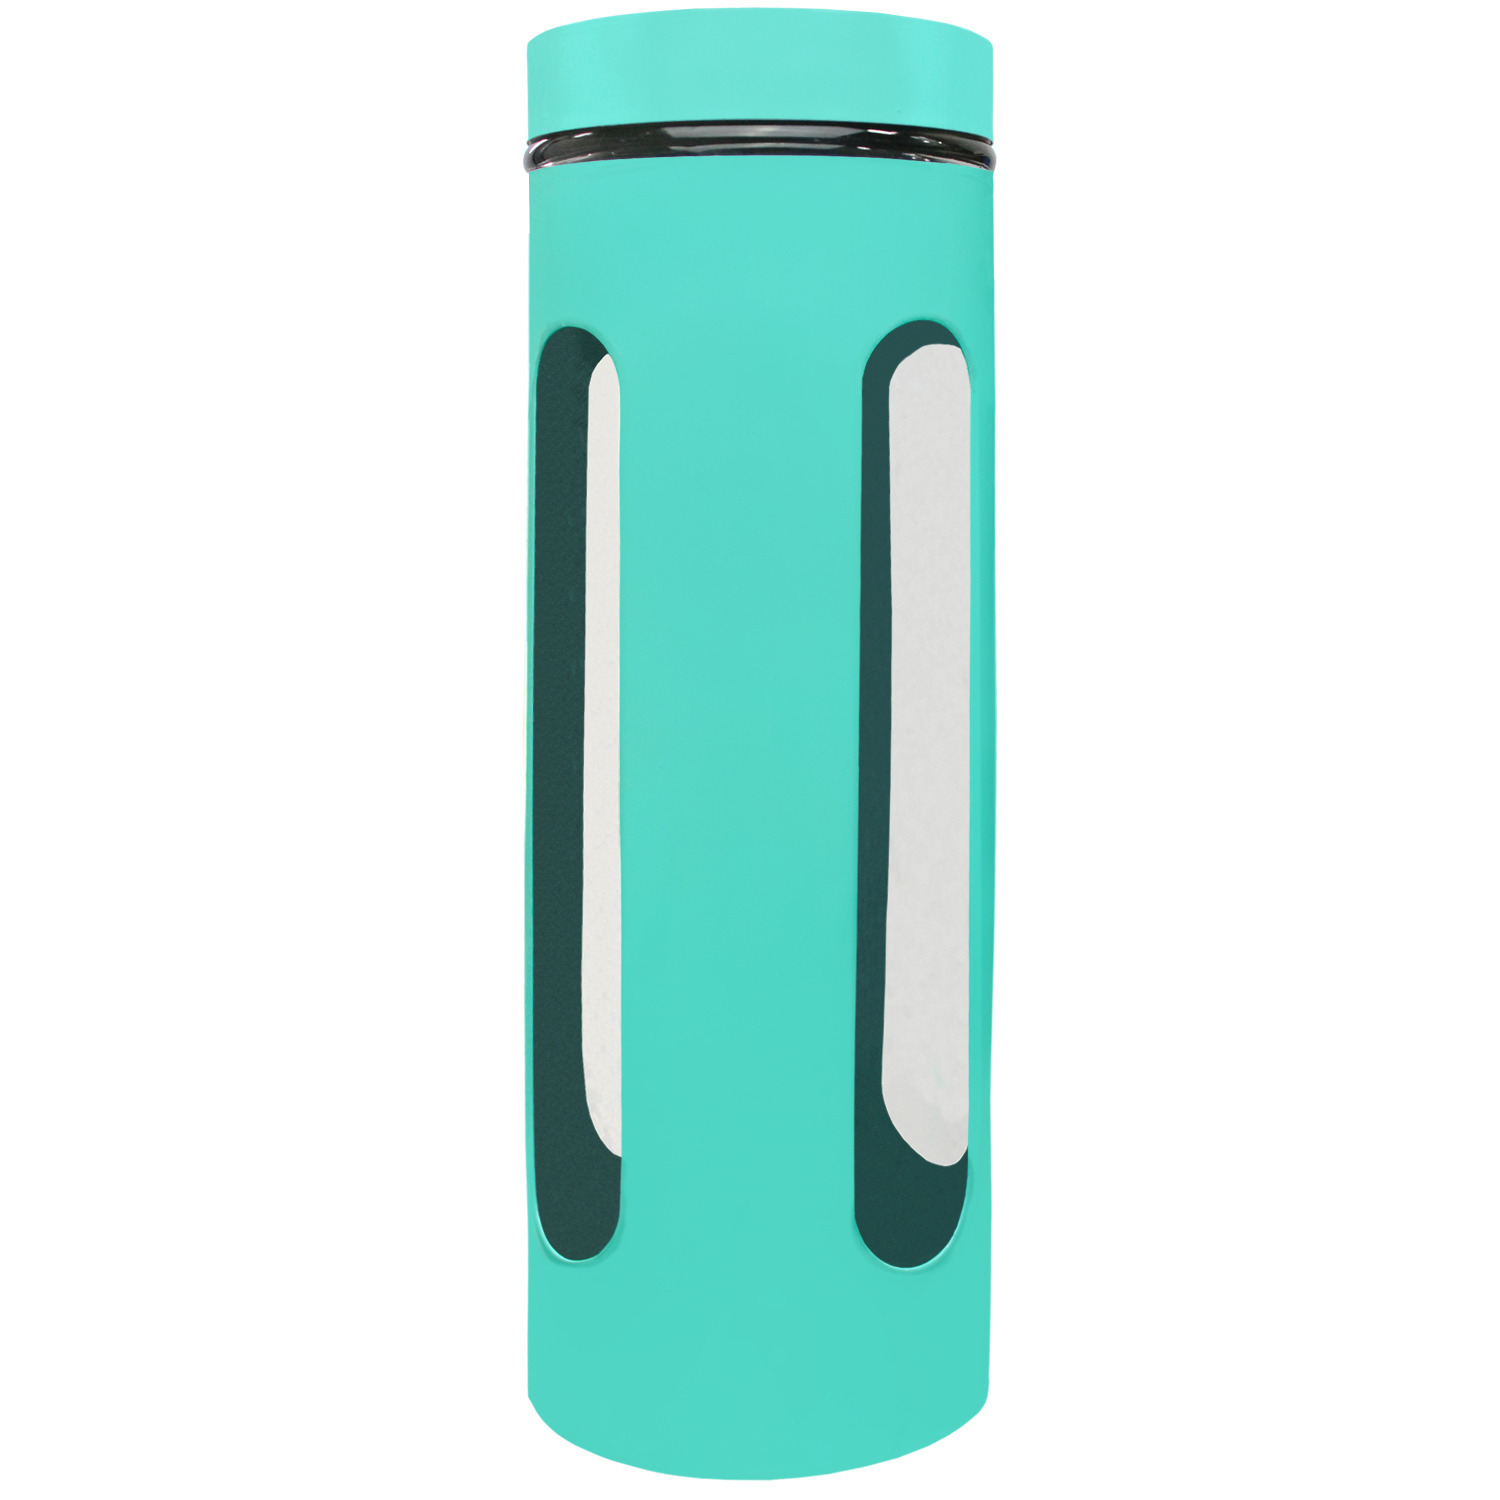 Blue Donuts 60oz Stainless Steel Canister with Window - Turquoise